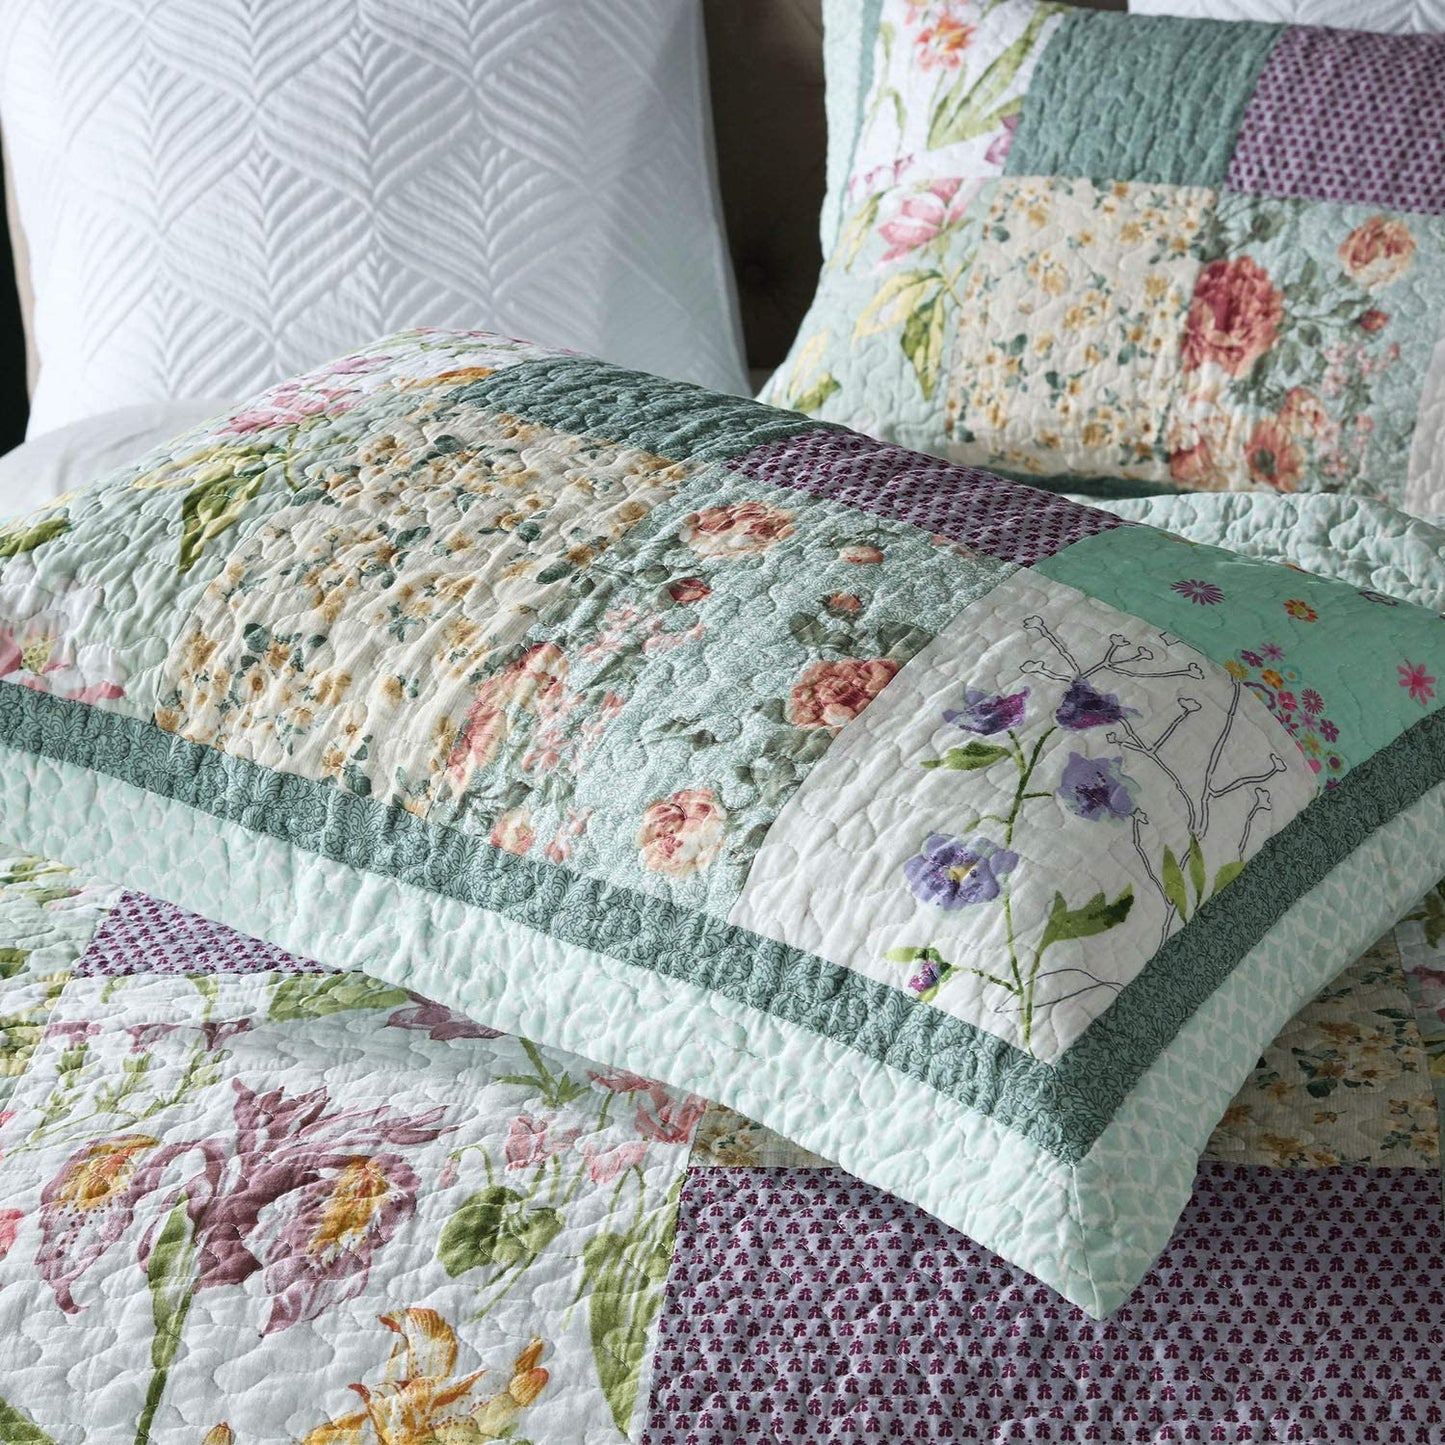 Cotton Bedspread Quilt Set with Real Stitched Embroidery Green Rustic Floral Pattern